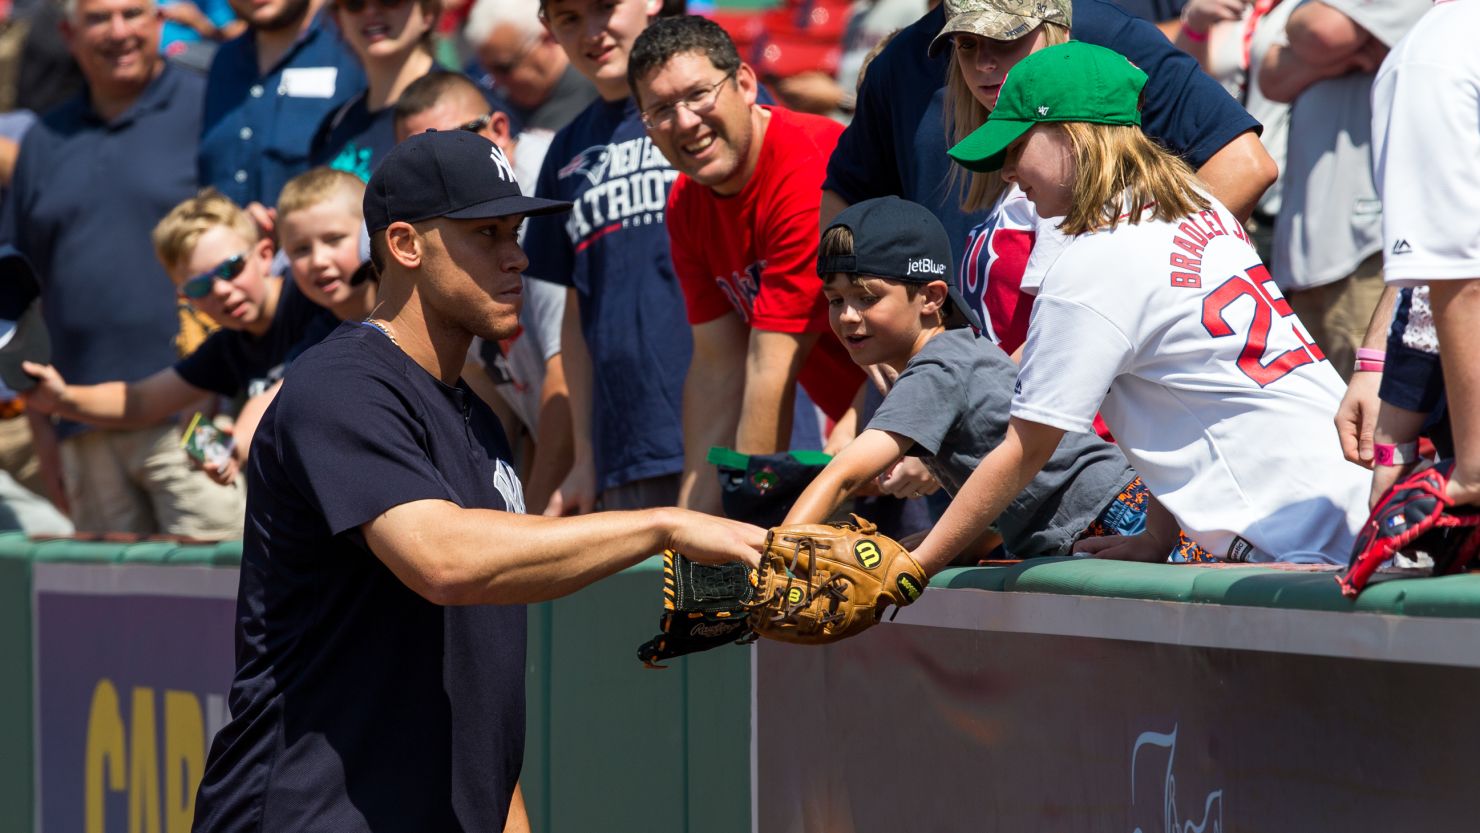 Aaron Judge #99 of the New York Yankees gives a ball to a young fan before a game against the Boston Red Sox at Fenway Park in July 2017